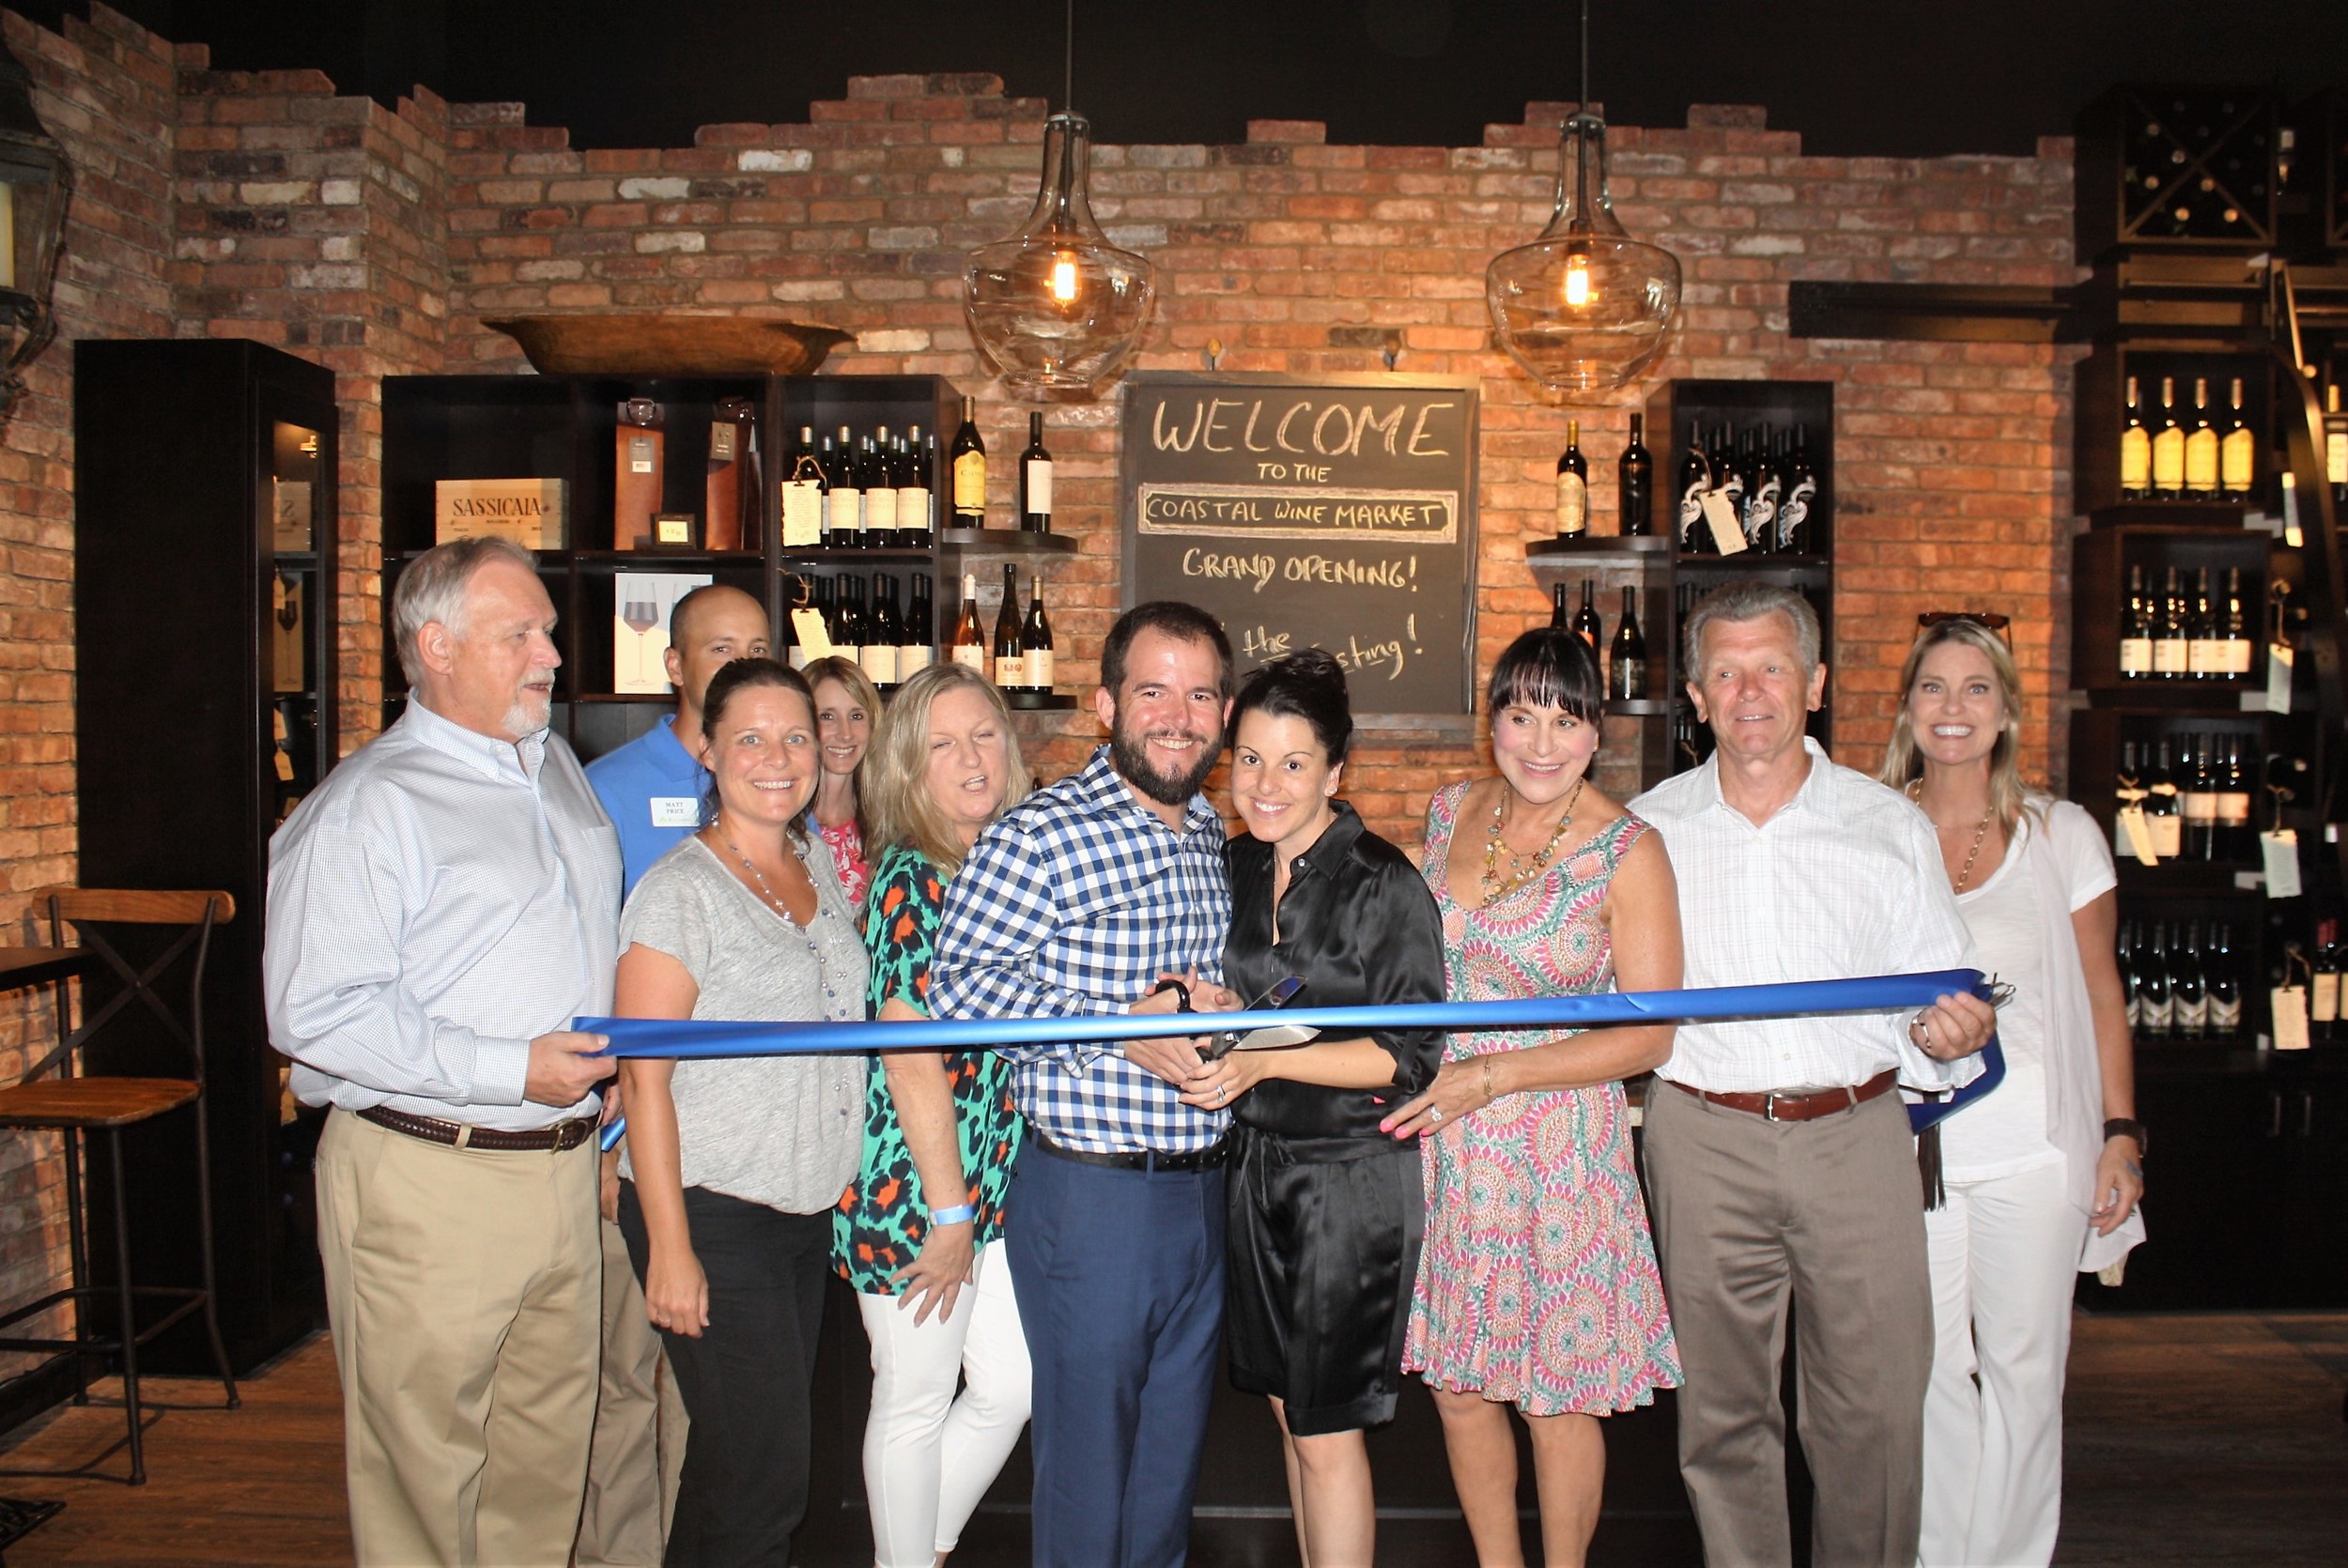 Steve and Shaun Lourie (center) cut the ribbon on their new Nocatee business, Coastal Wine Market.